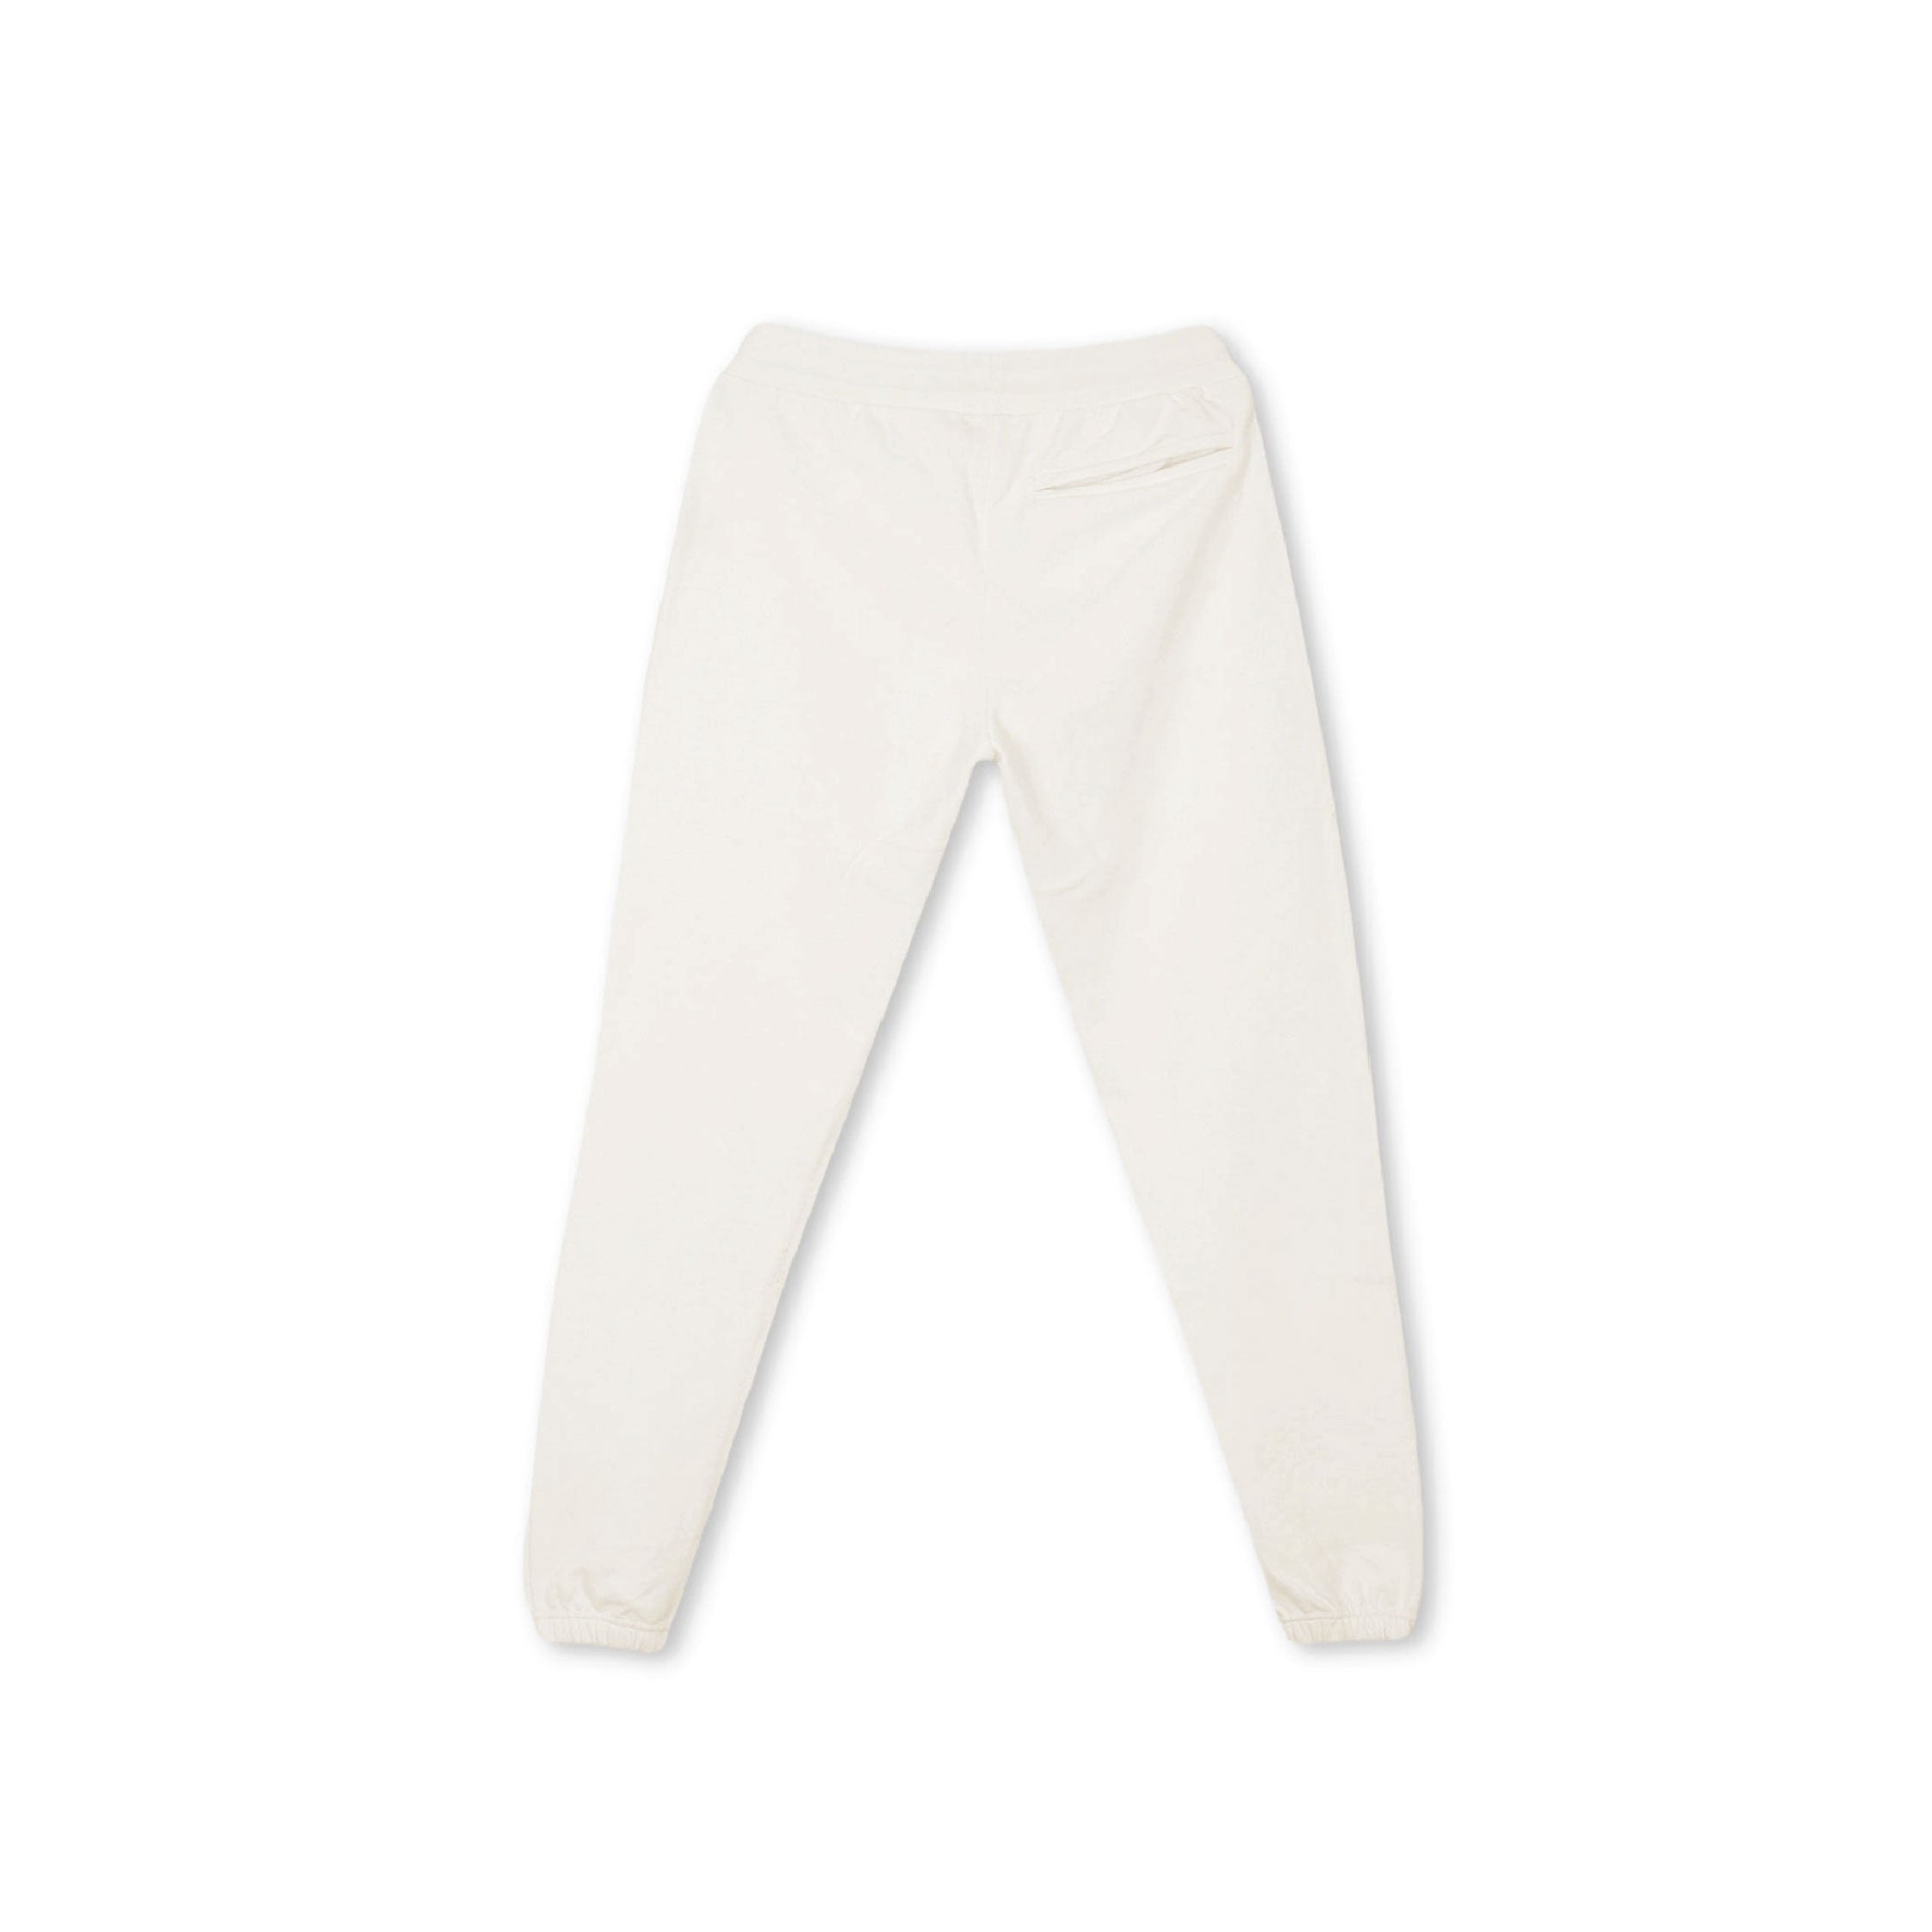 ESTATE OF MIND FRENCH TERRY SWEATPANTS - VINTAGE WHITE